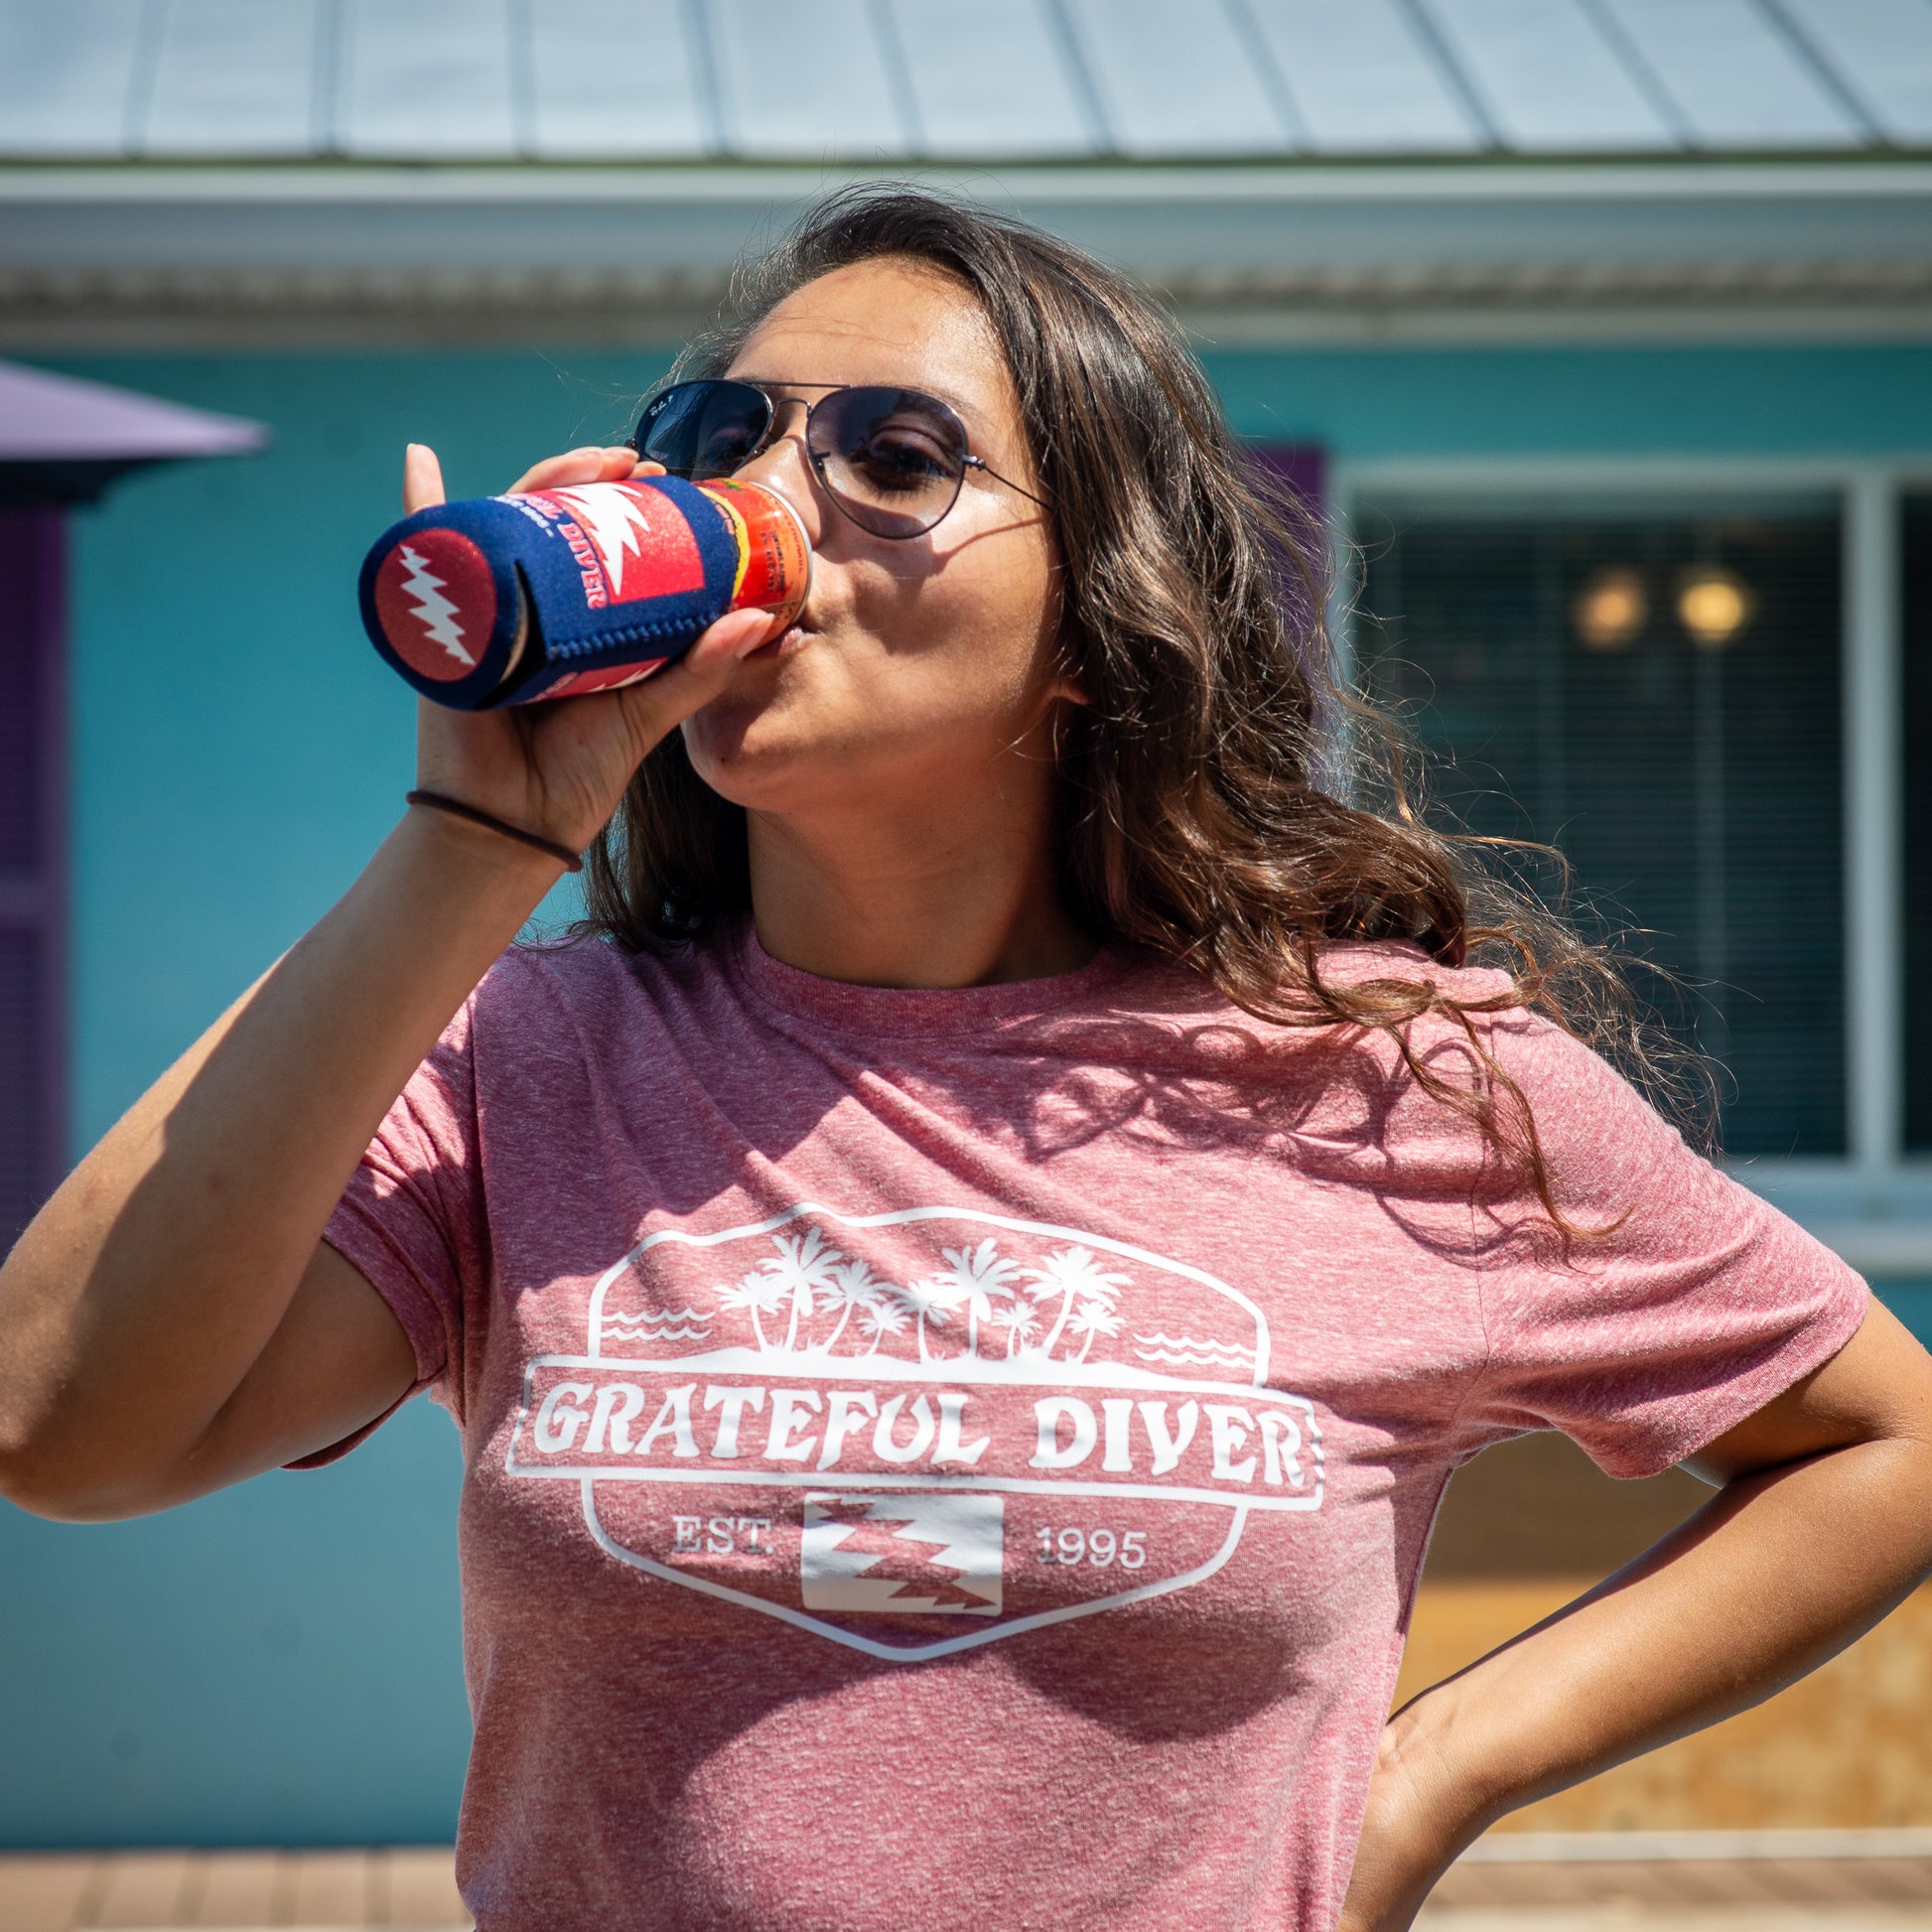 Grateful Diver Palm Island T-shirt in red on woman taking a drink from a Grateful Diver can koozie in front of building